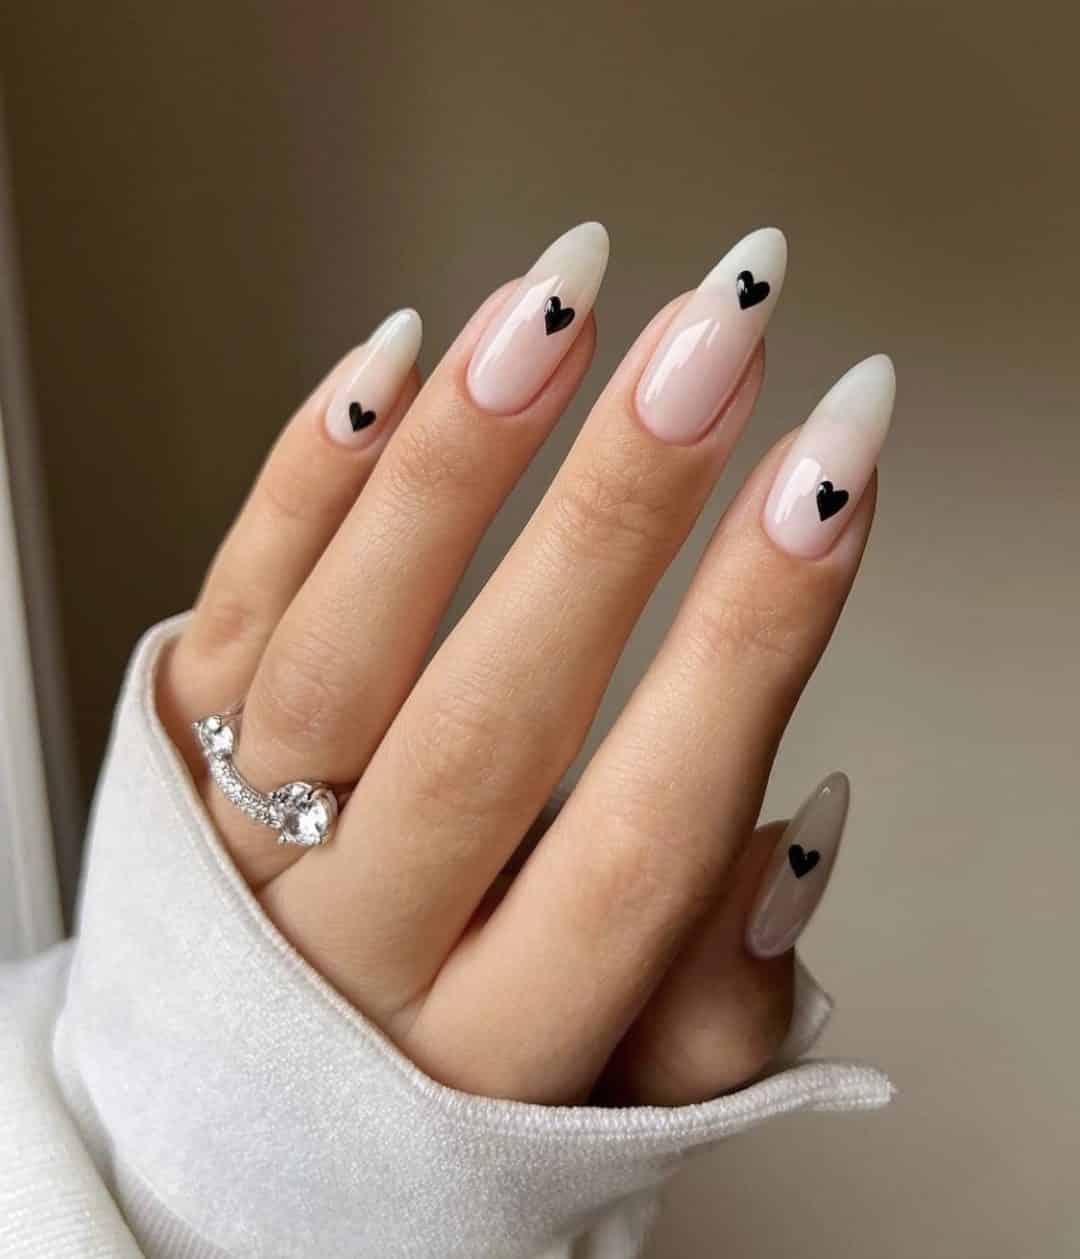 30 Trendy March Nails You'll Love To Try In 2022. HONESTLYBECCA